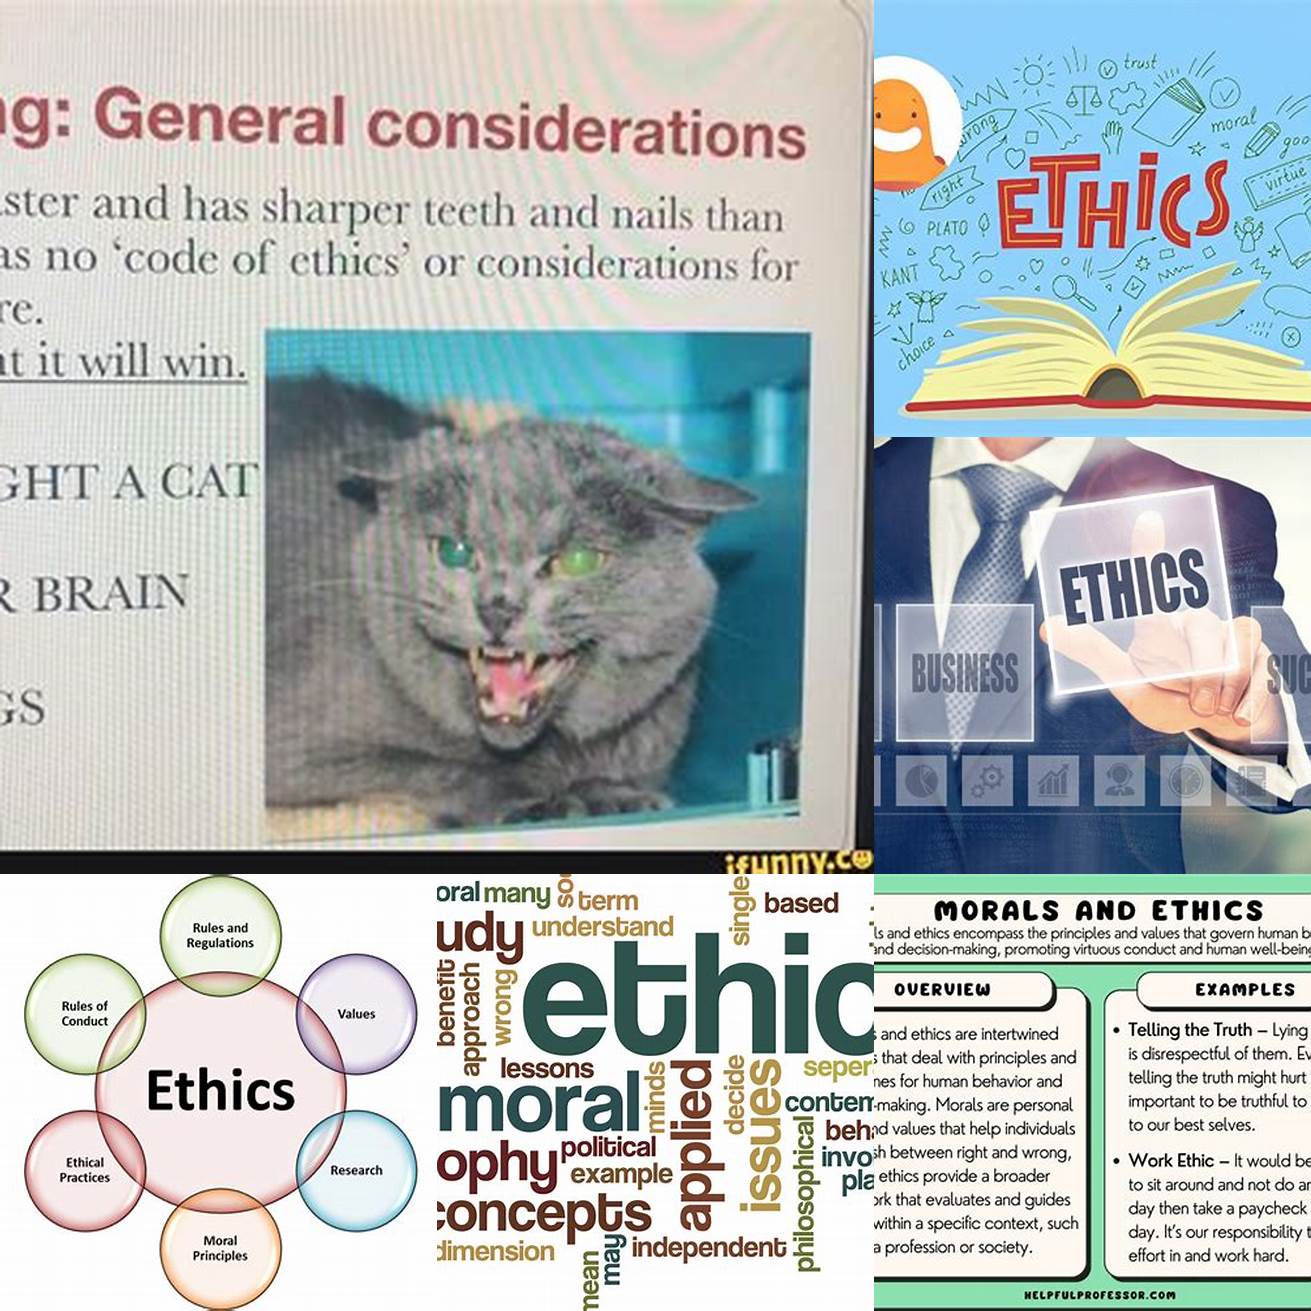 5 Ethical Considerations